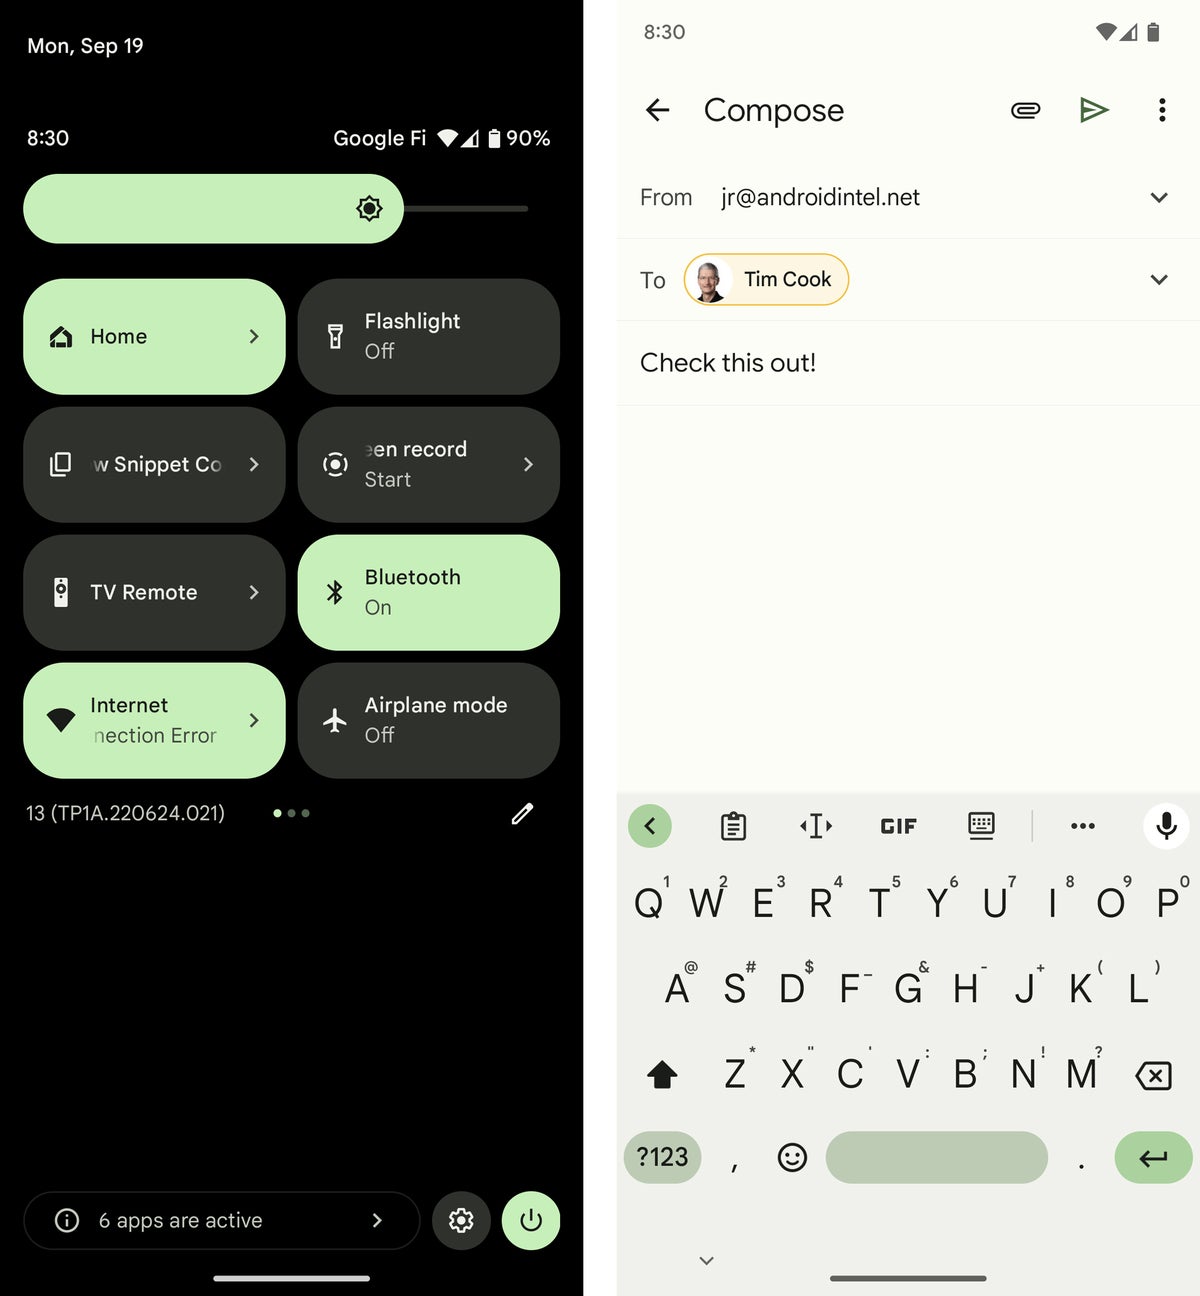 Android Design / Material You: Quick Settings, keyboard